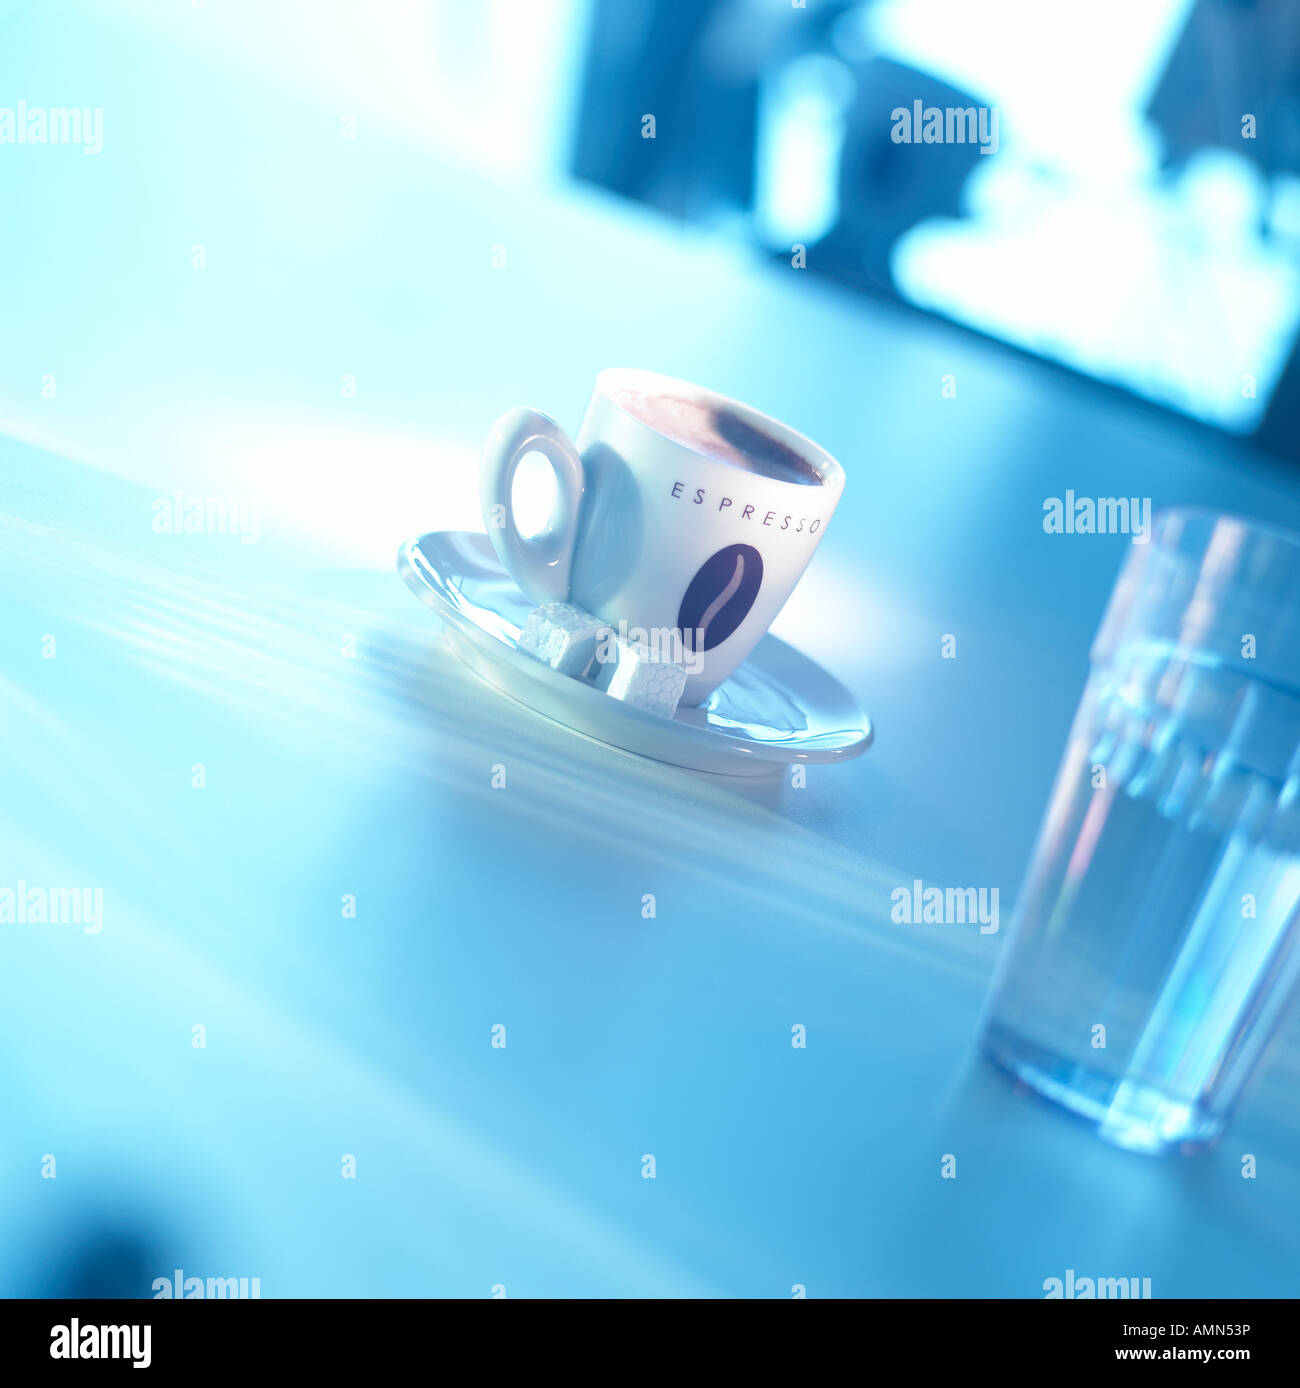 Holding an espresso cup Stock Photo